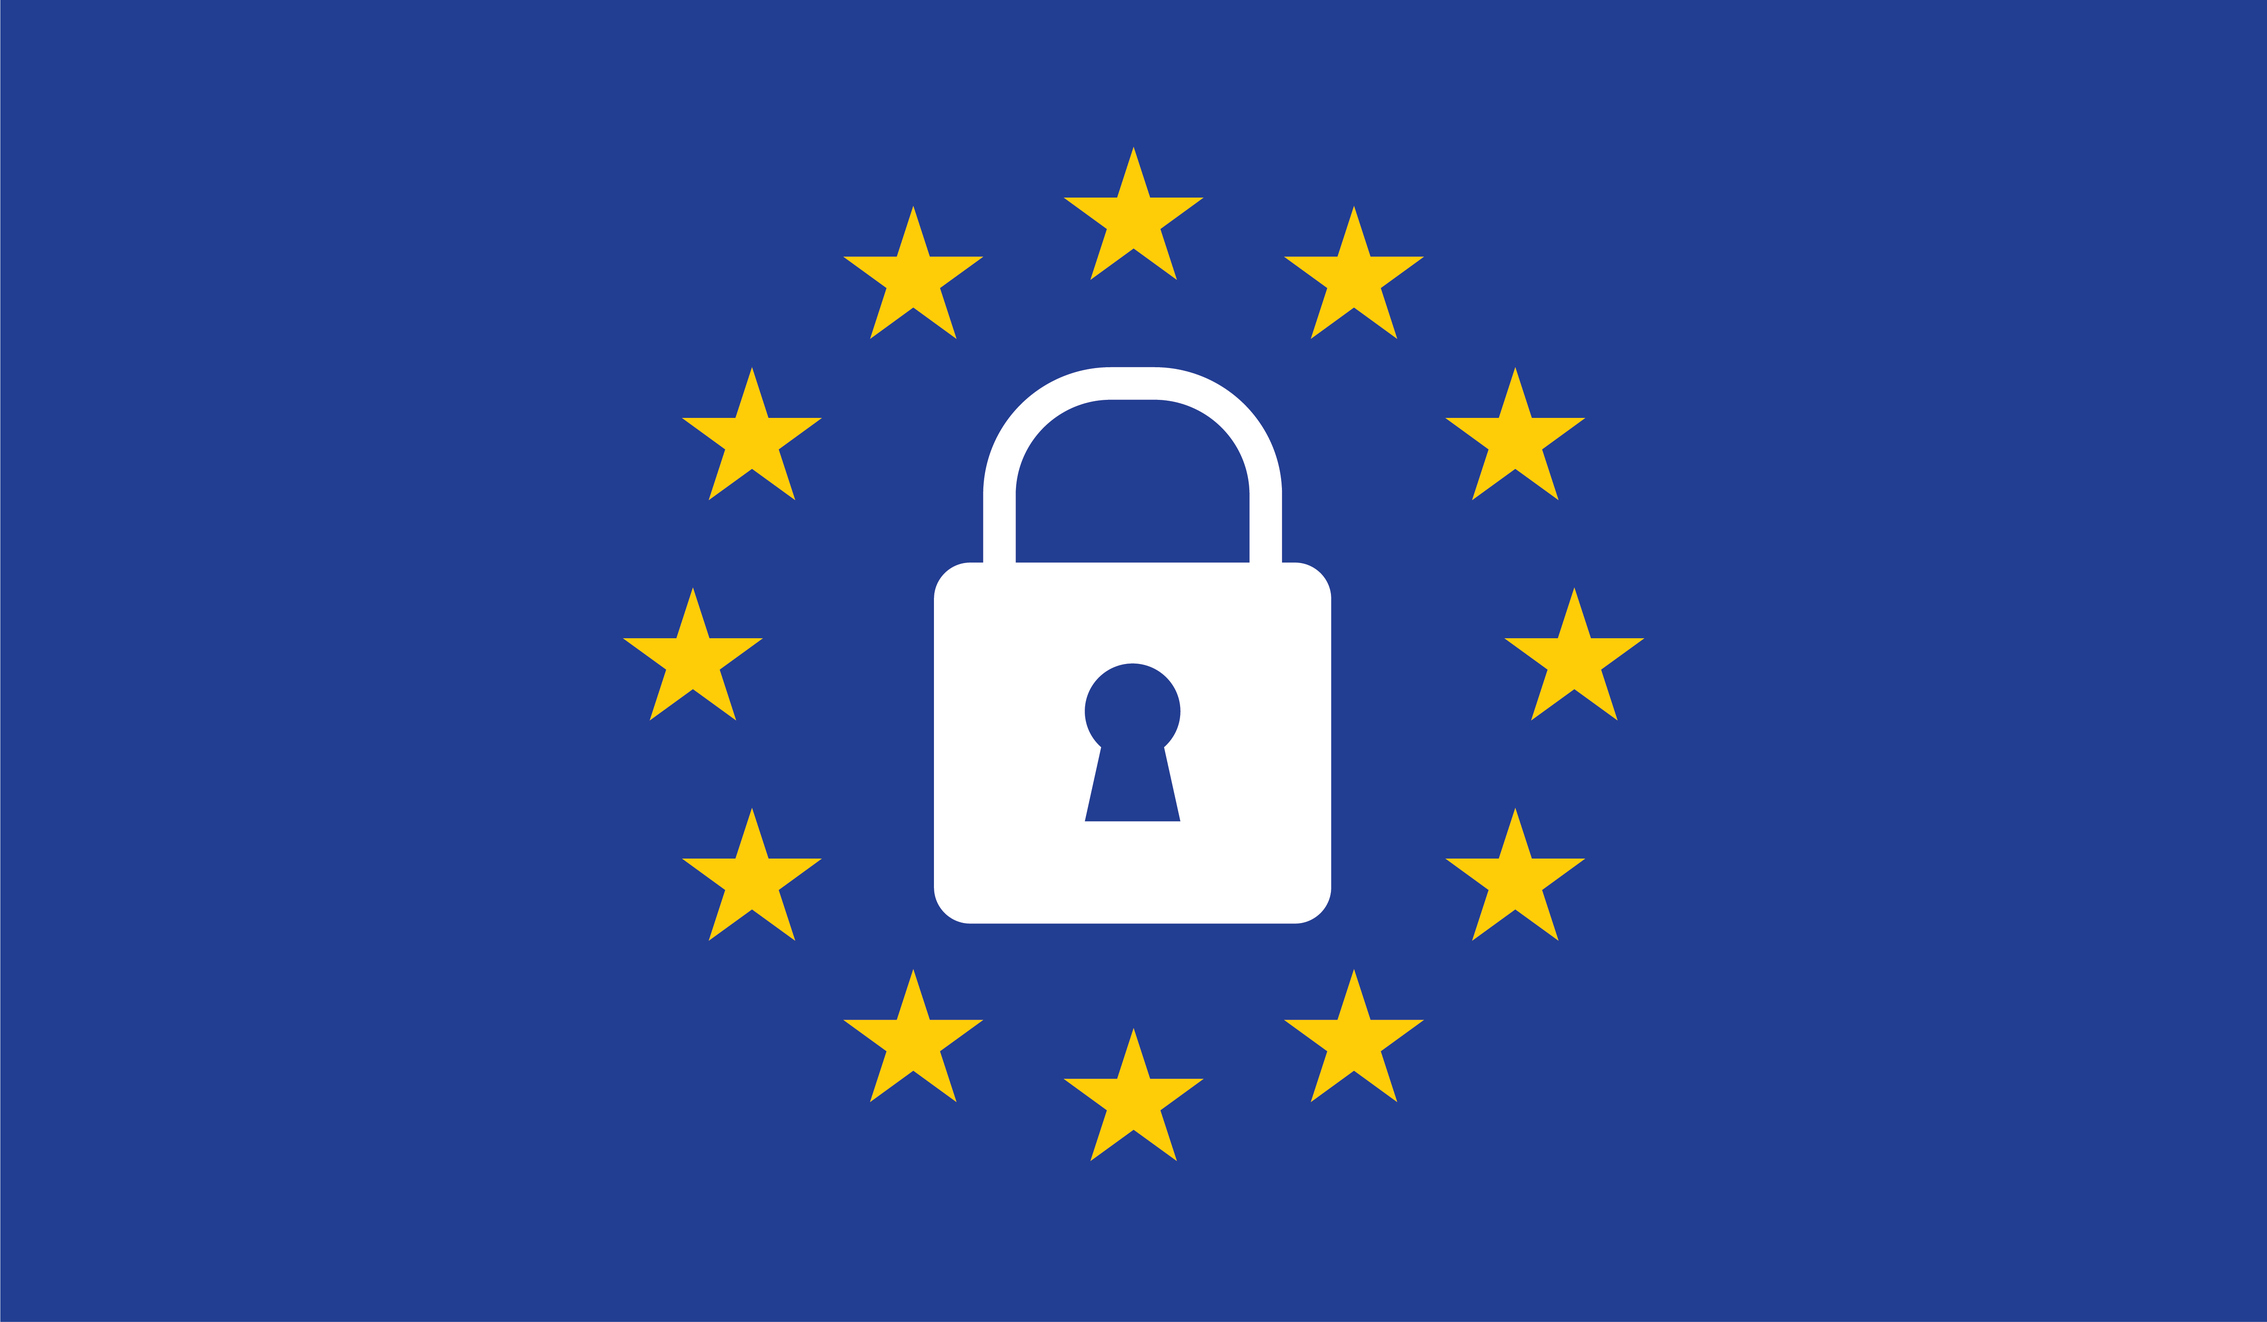 GDPR helps enhance personal data protection